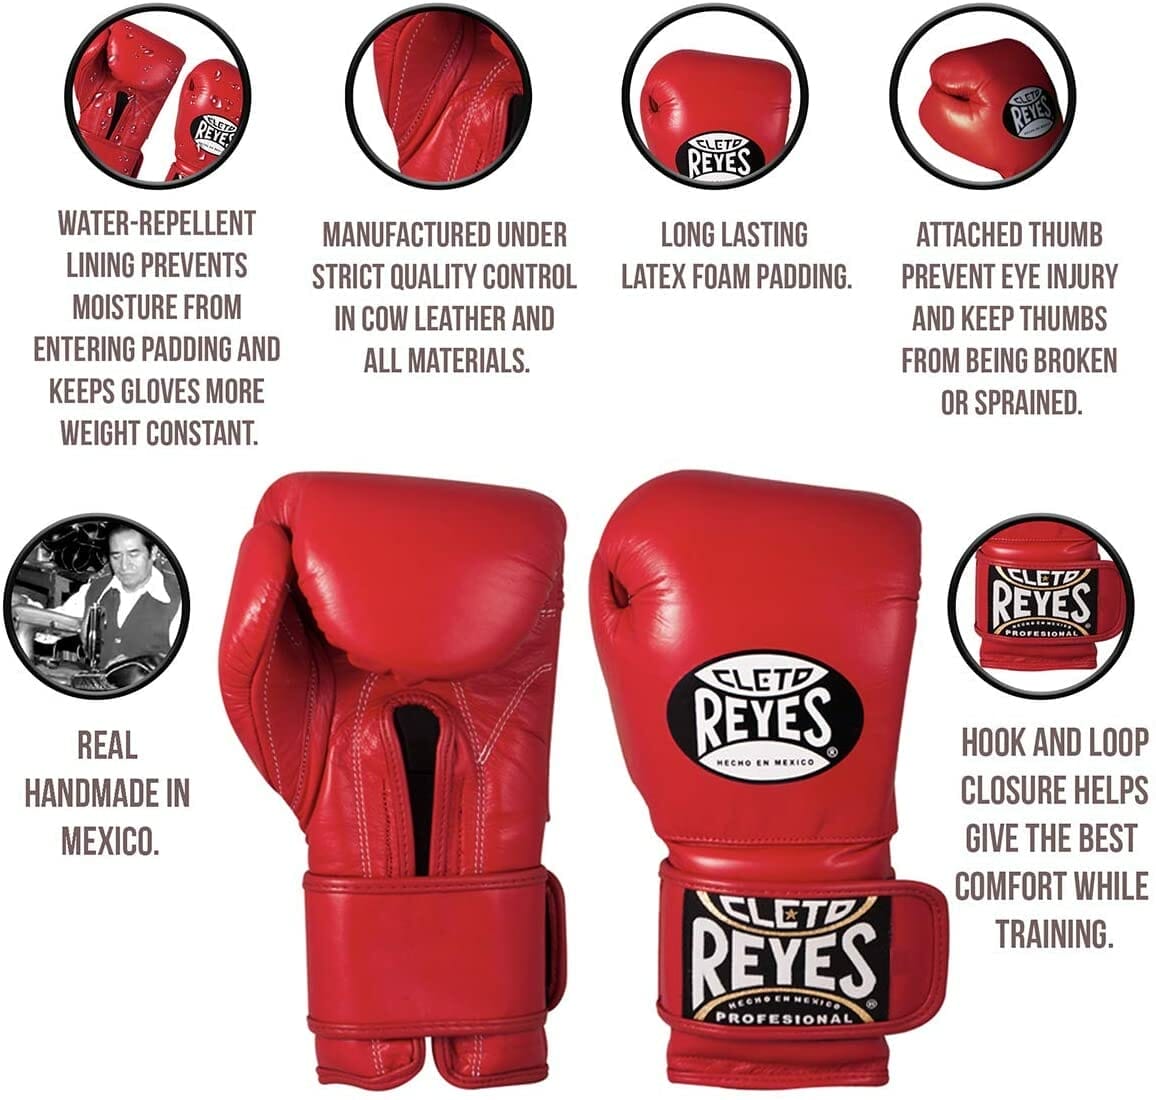 Cleto Reyes Hook and Loop Leather Training Boxing Gloves